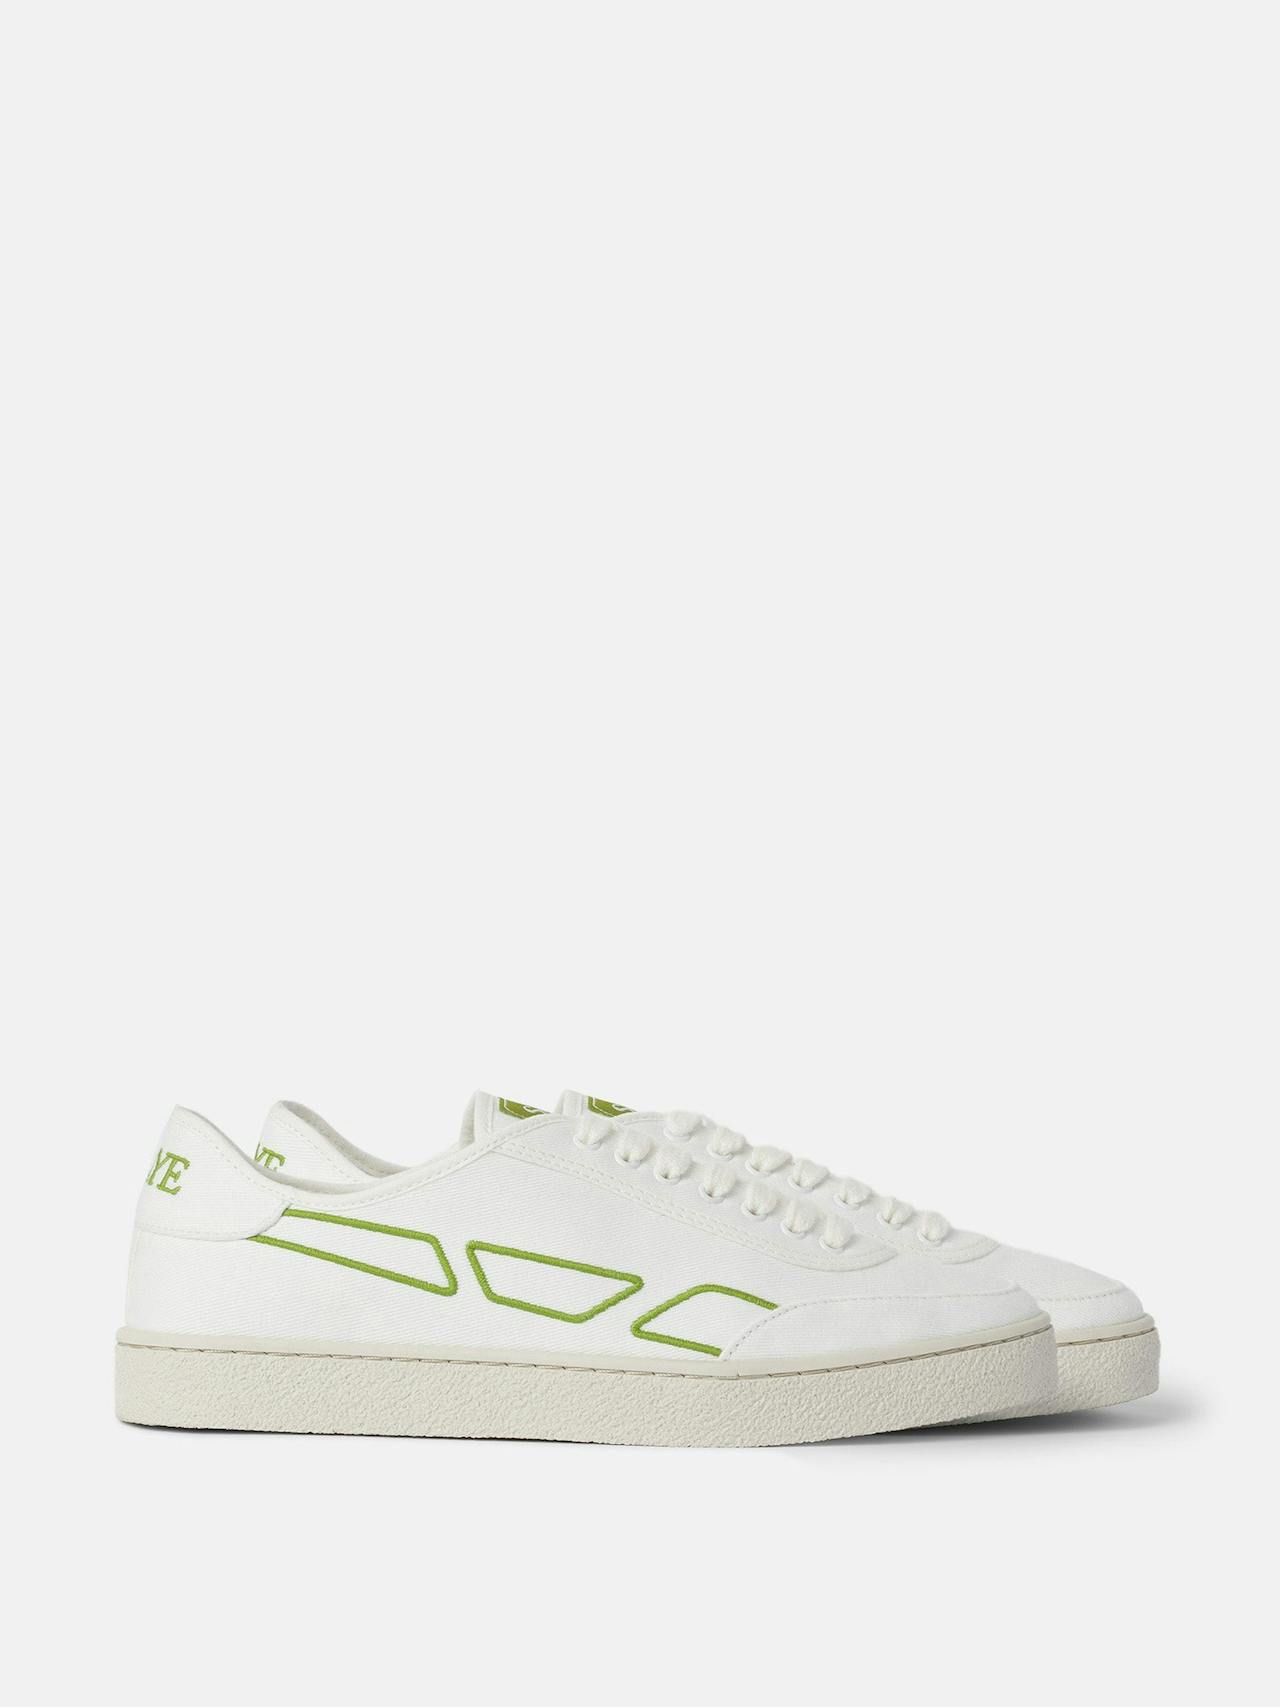 Modelo '65 trainer in lime